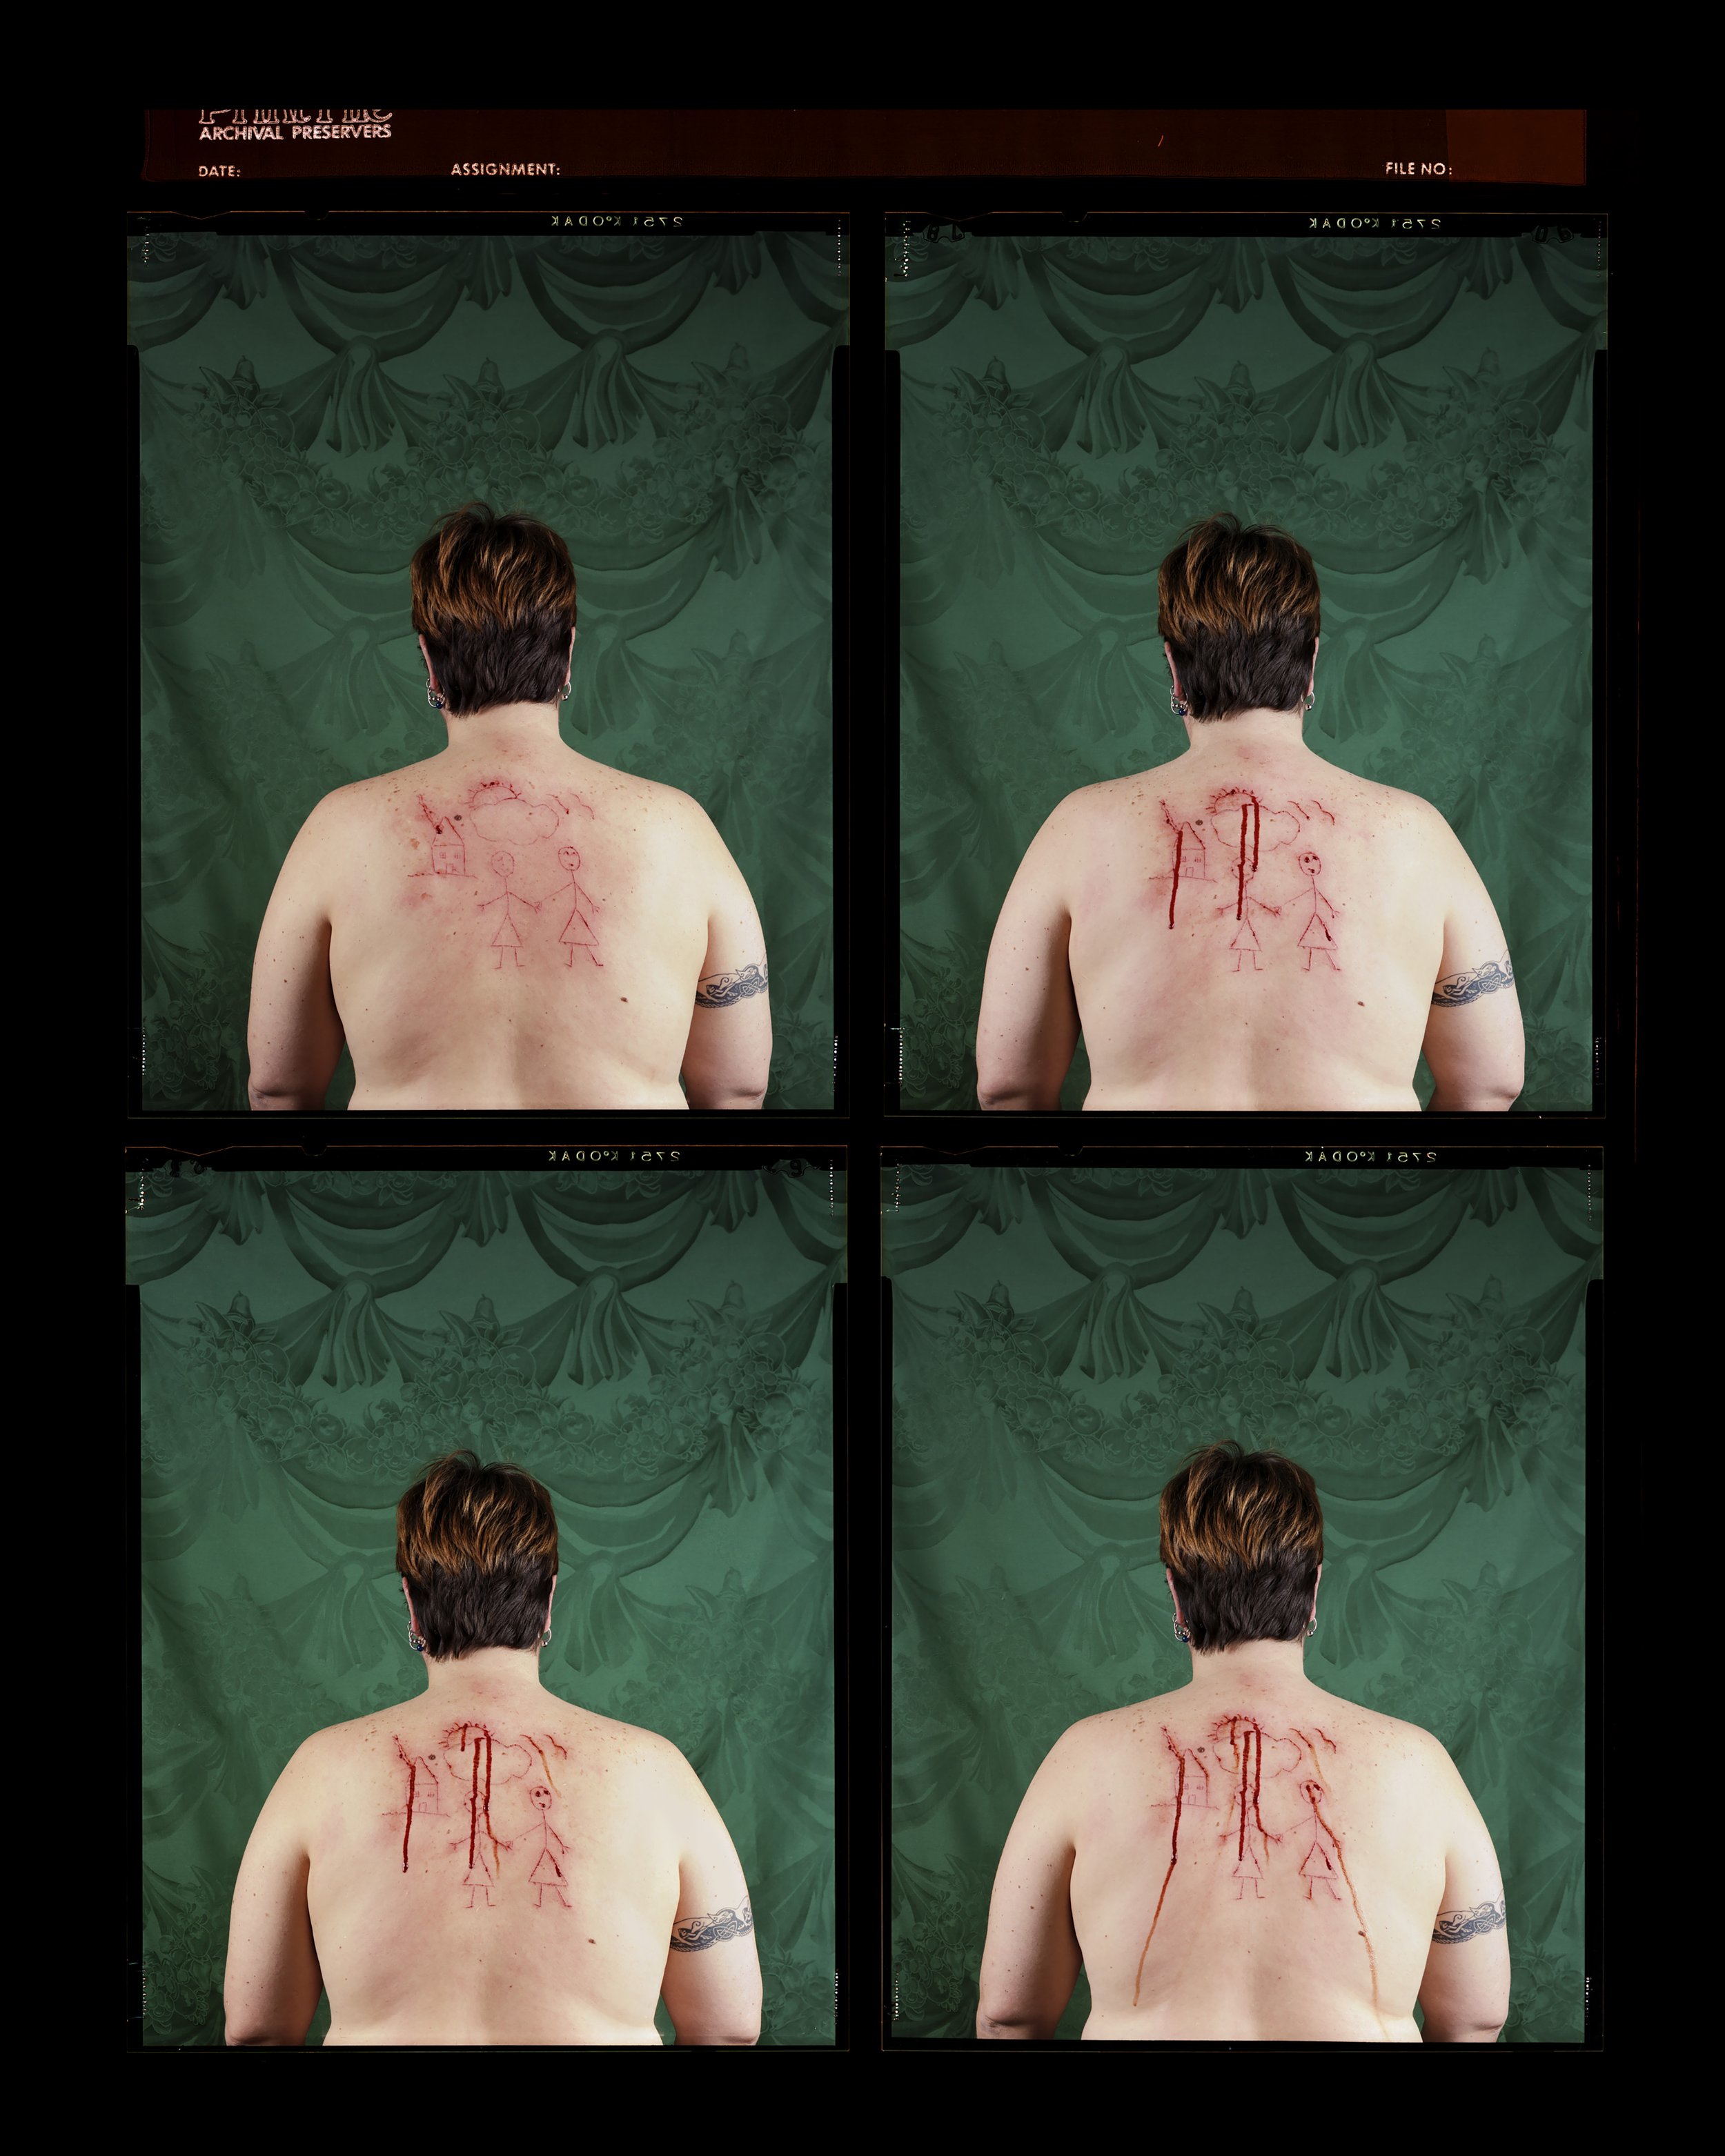   Catherine Opie,   Self-Portrait/Cutting contact sheet, 2003 , 2003/2024 © Catherine Opie, Courtesy Regen Projects, Los Angeles  